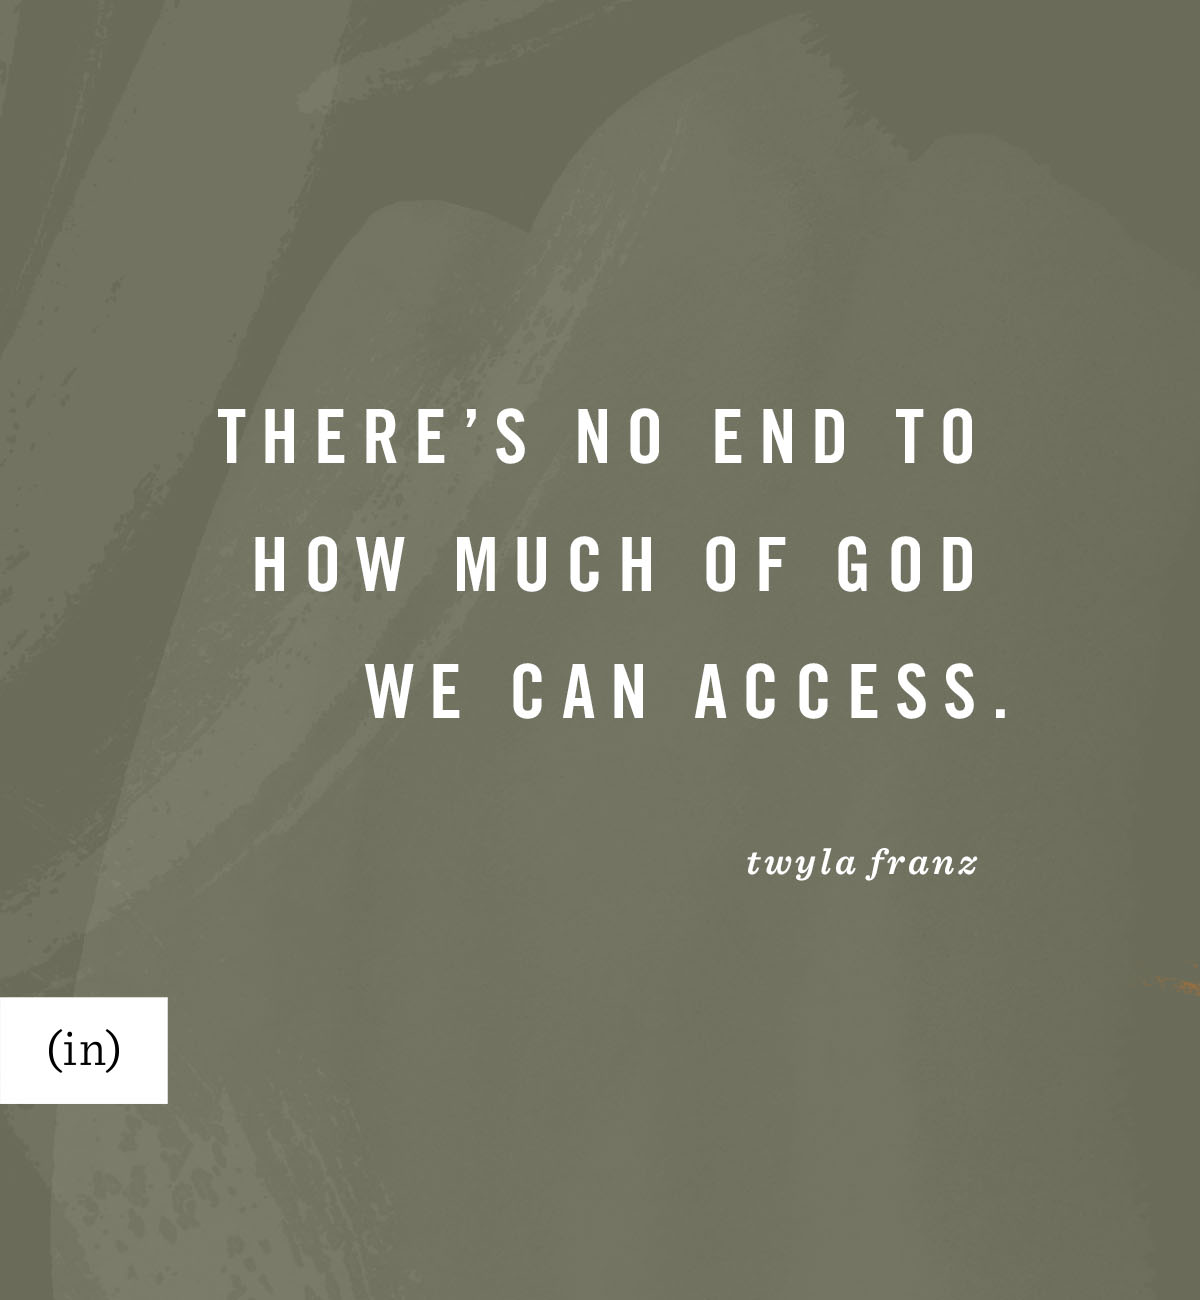 There’s no end to how much of God we can access. -Twyla Franz